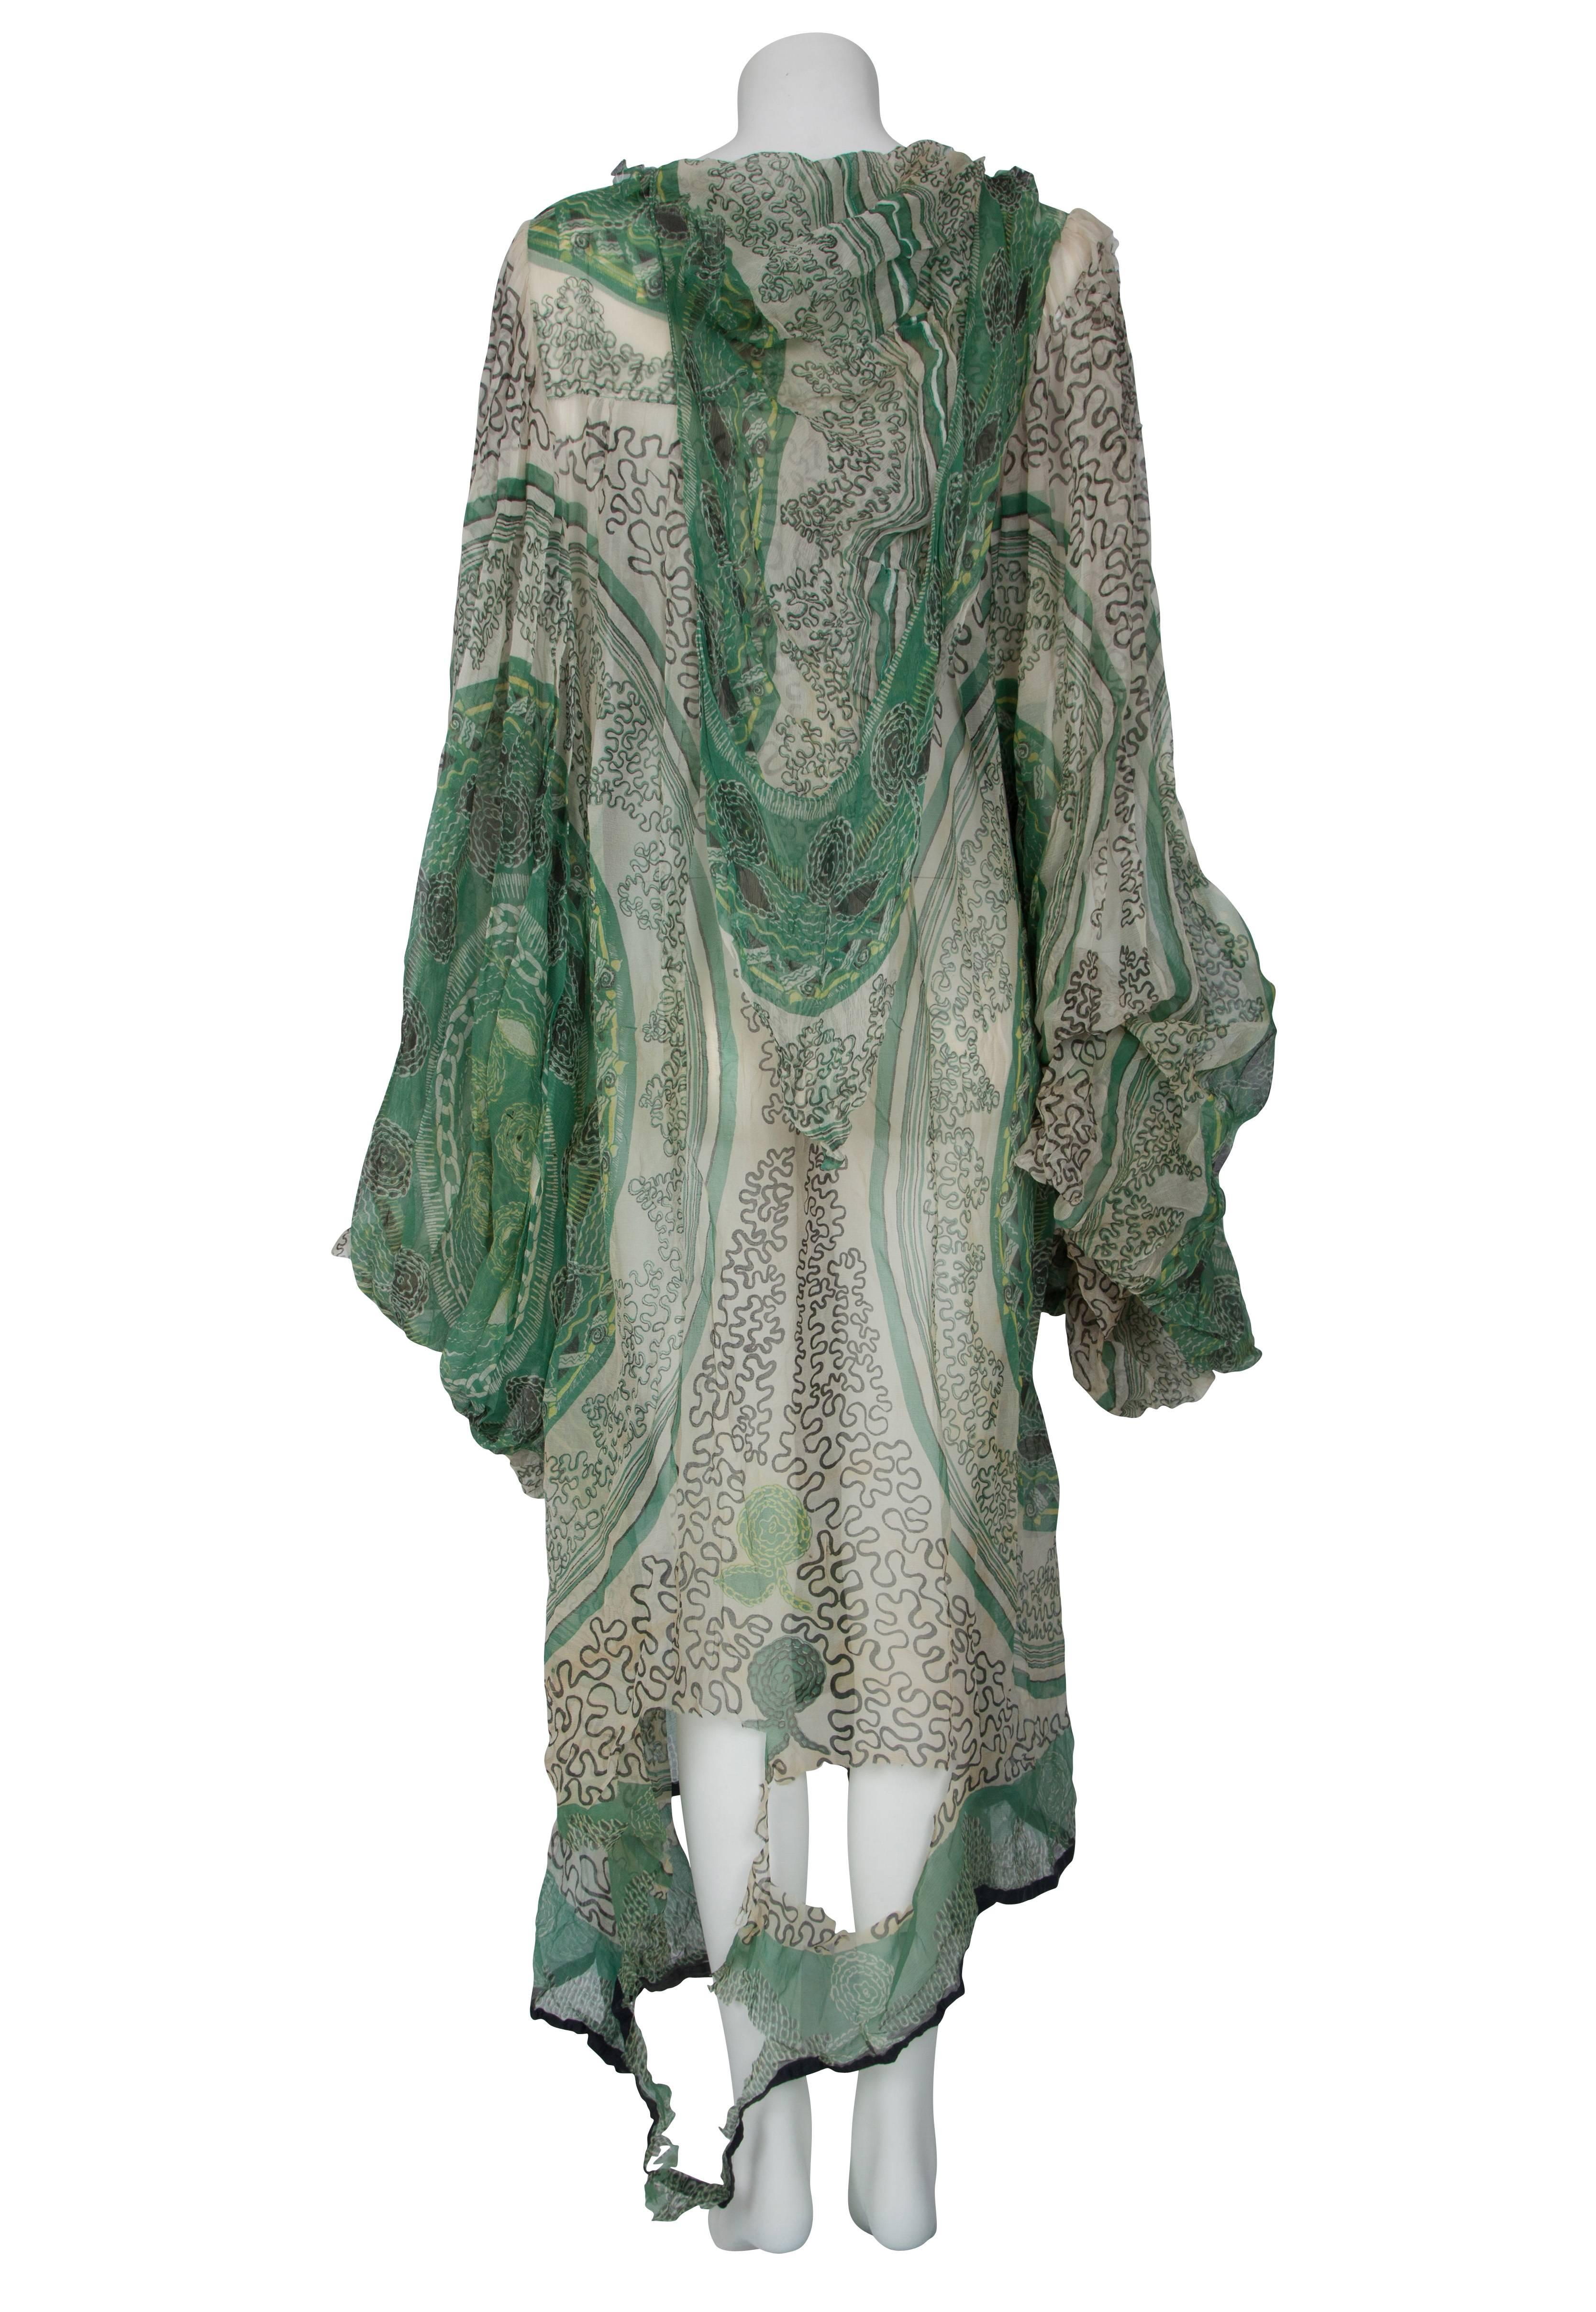 A beautiful and rare Zandra Rhodes ivory and green printed silk tunic with dramatic full-length sleeves from her 1969 debut collection ‘The Knitted Circle’. This collector’s item is constructed from lightweight diaphanous silk with an intricate